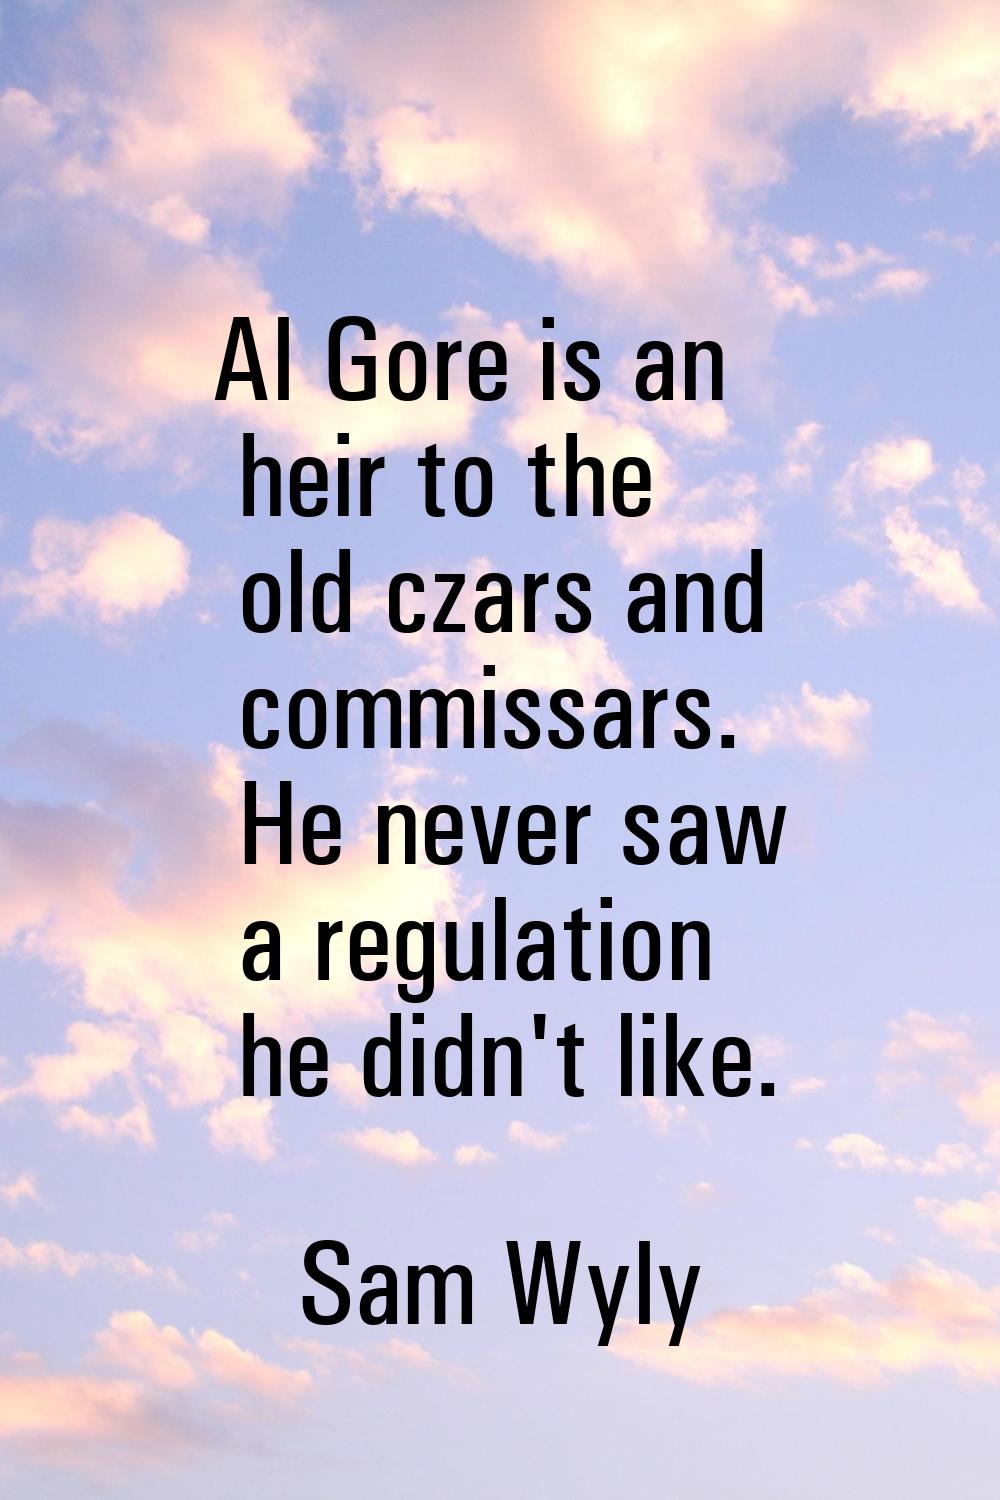 Al Gore is an heir to the old czars and commissars. He never saw a regulation he didn't like.